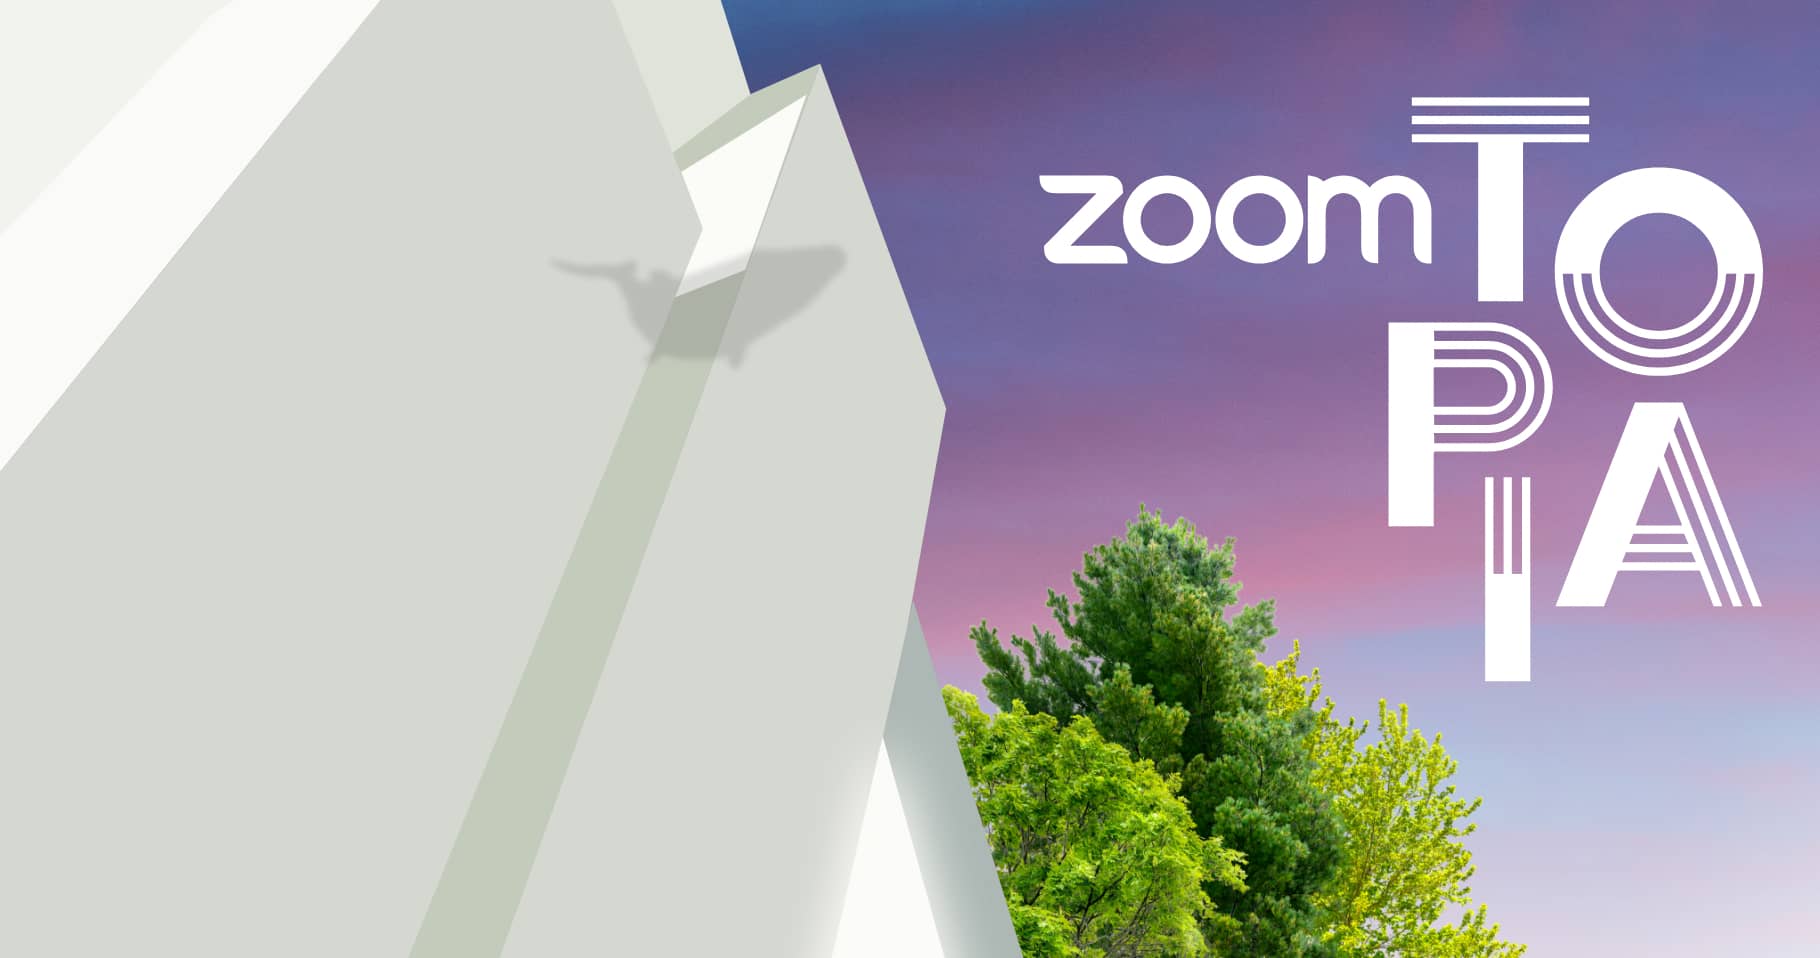 Zoomtopia 2021: Zoom Previews Future of Work, Oculus Support to Come